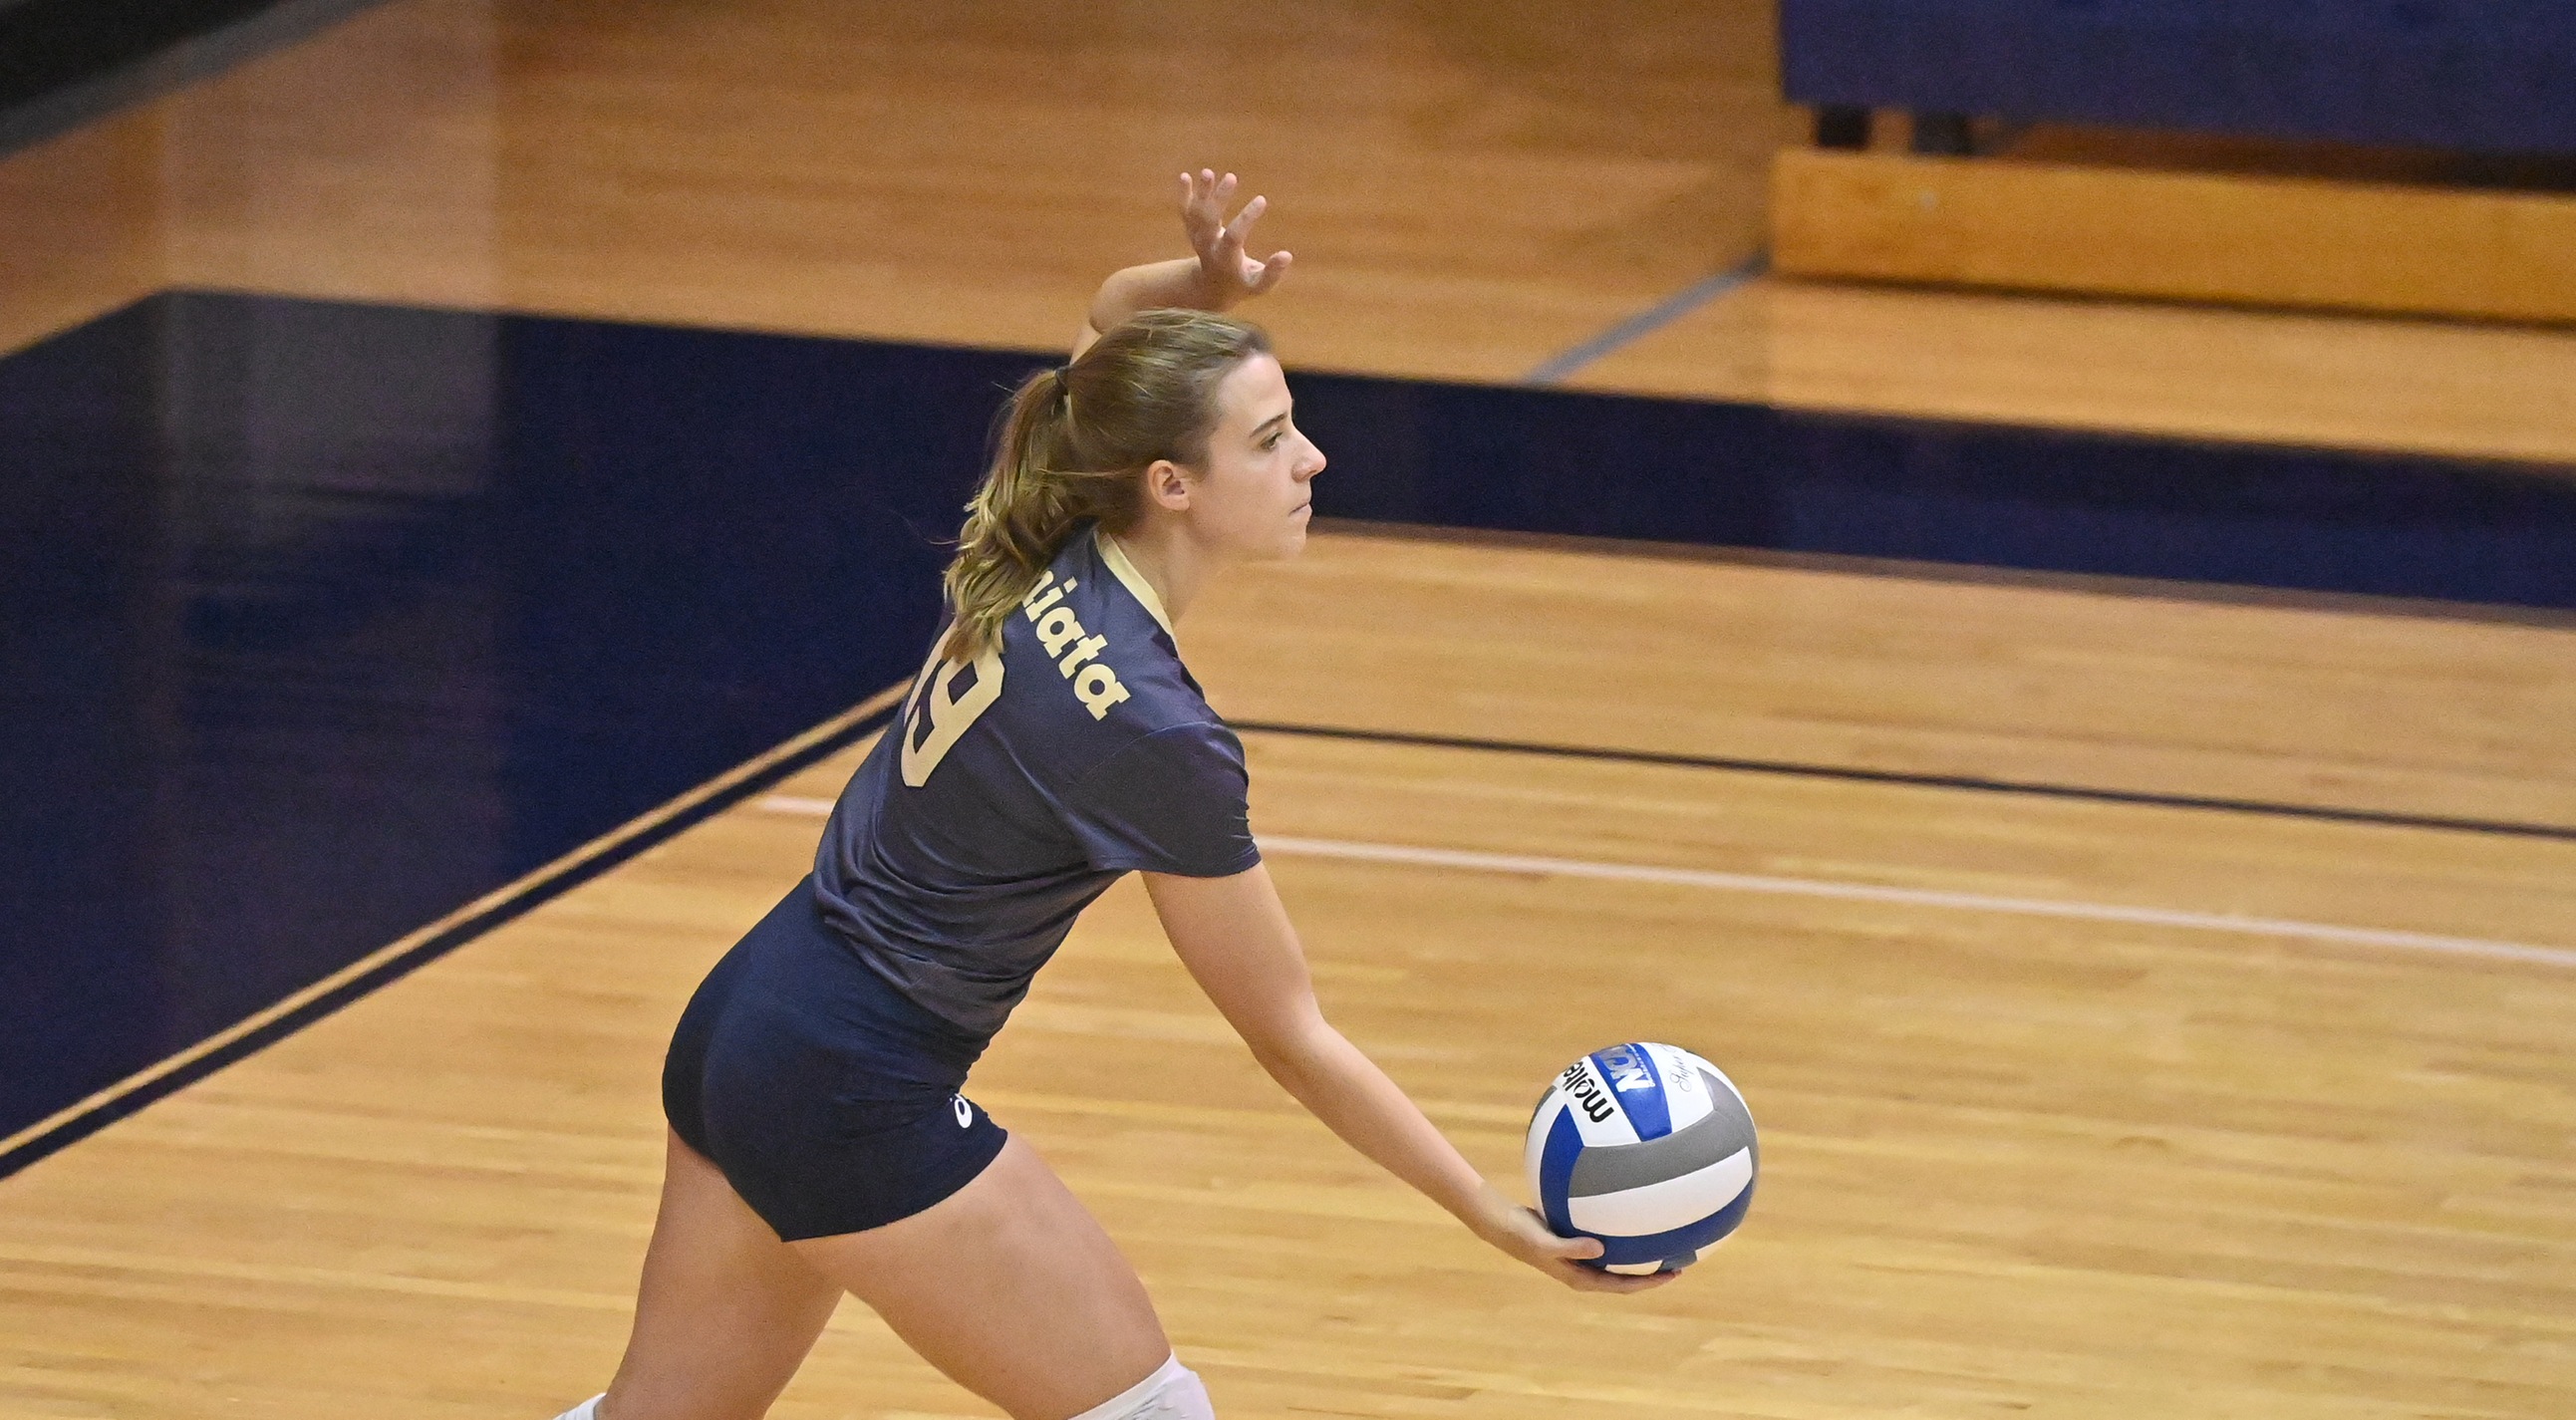 Eagles Sweep River Hawks to Complete Perfect Start to Conference Play